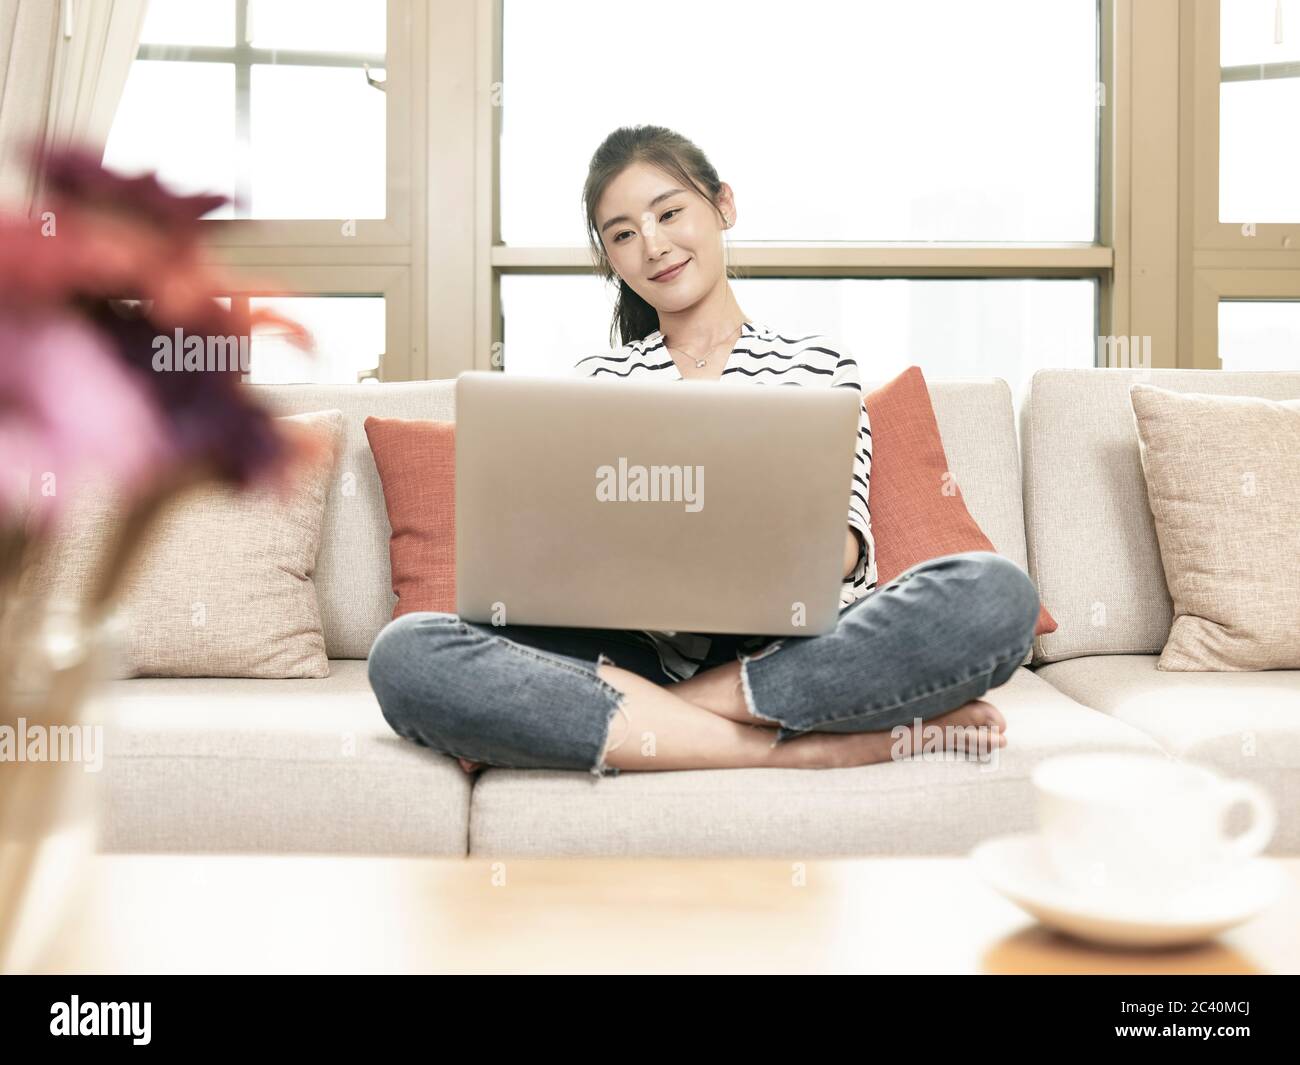 young asian businesswoman working from home sitting on couch using laptop computer Stock Photo